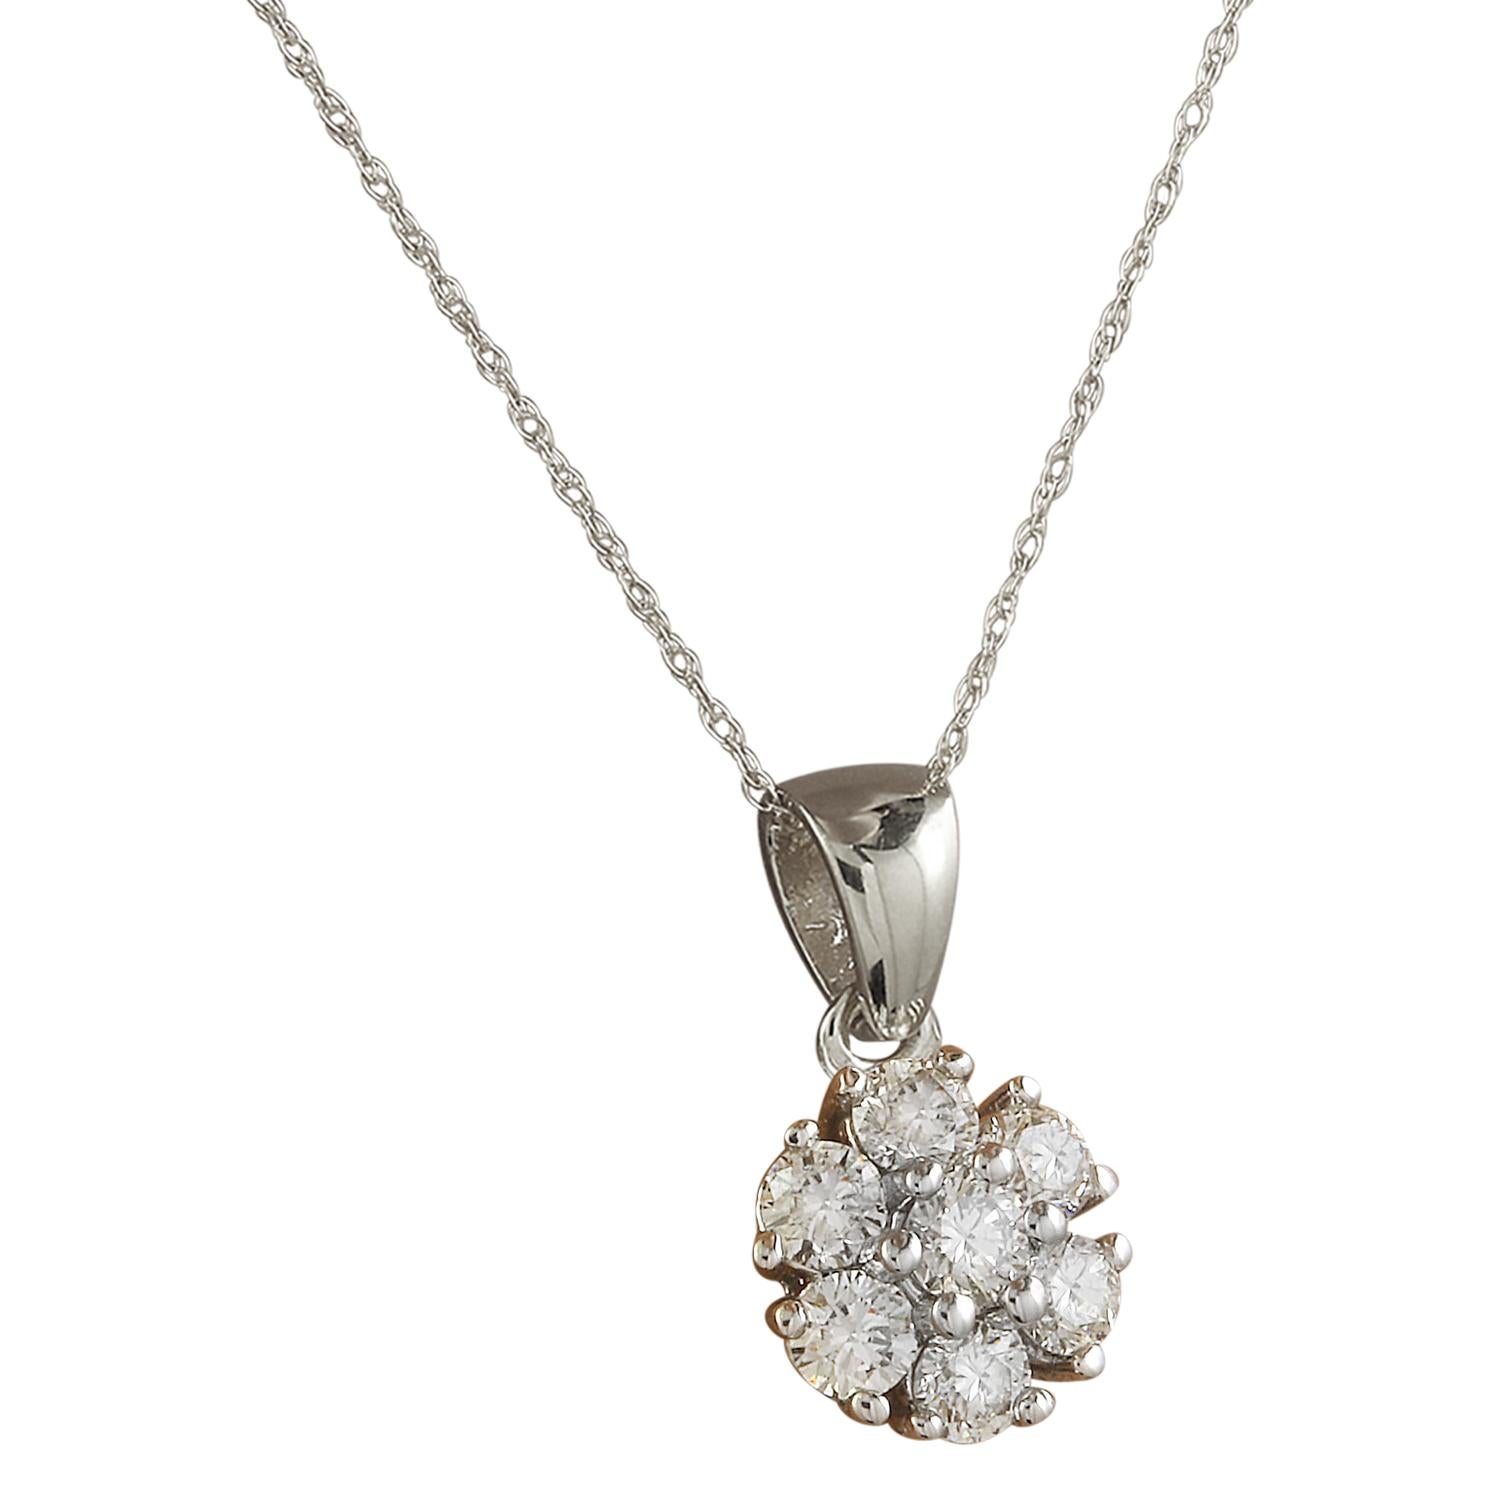 Introducing our elegant 0.70 Carat Natural Diamond Necklace in 14 Karat White Gold. Crafted from stamped 14K white gold, this necklace boasts a total weight of 1.4 grams, ensuring both quality and comfort. Adorning the neckline, the necklace